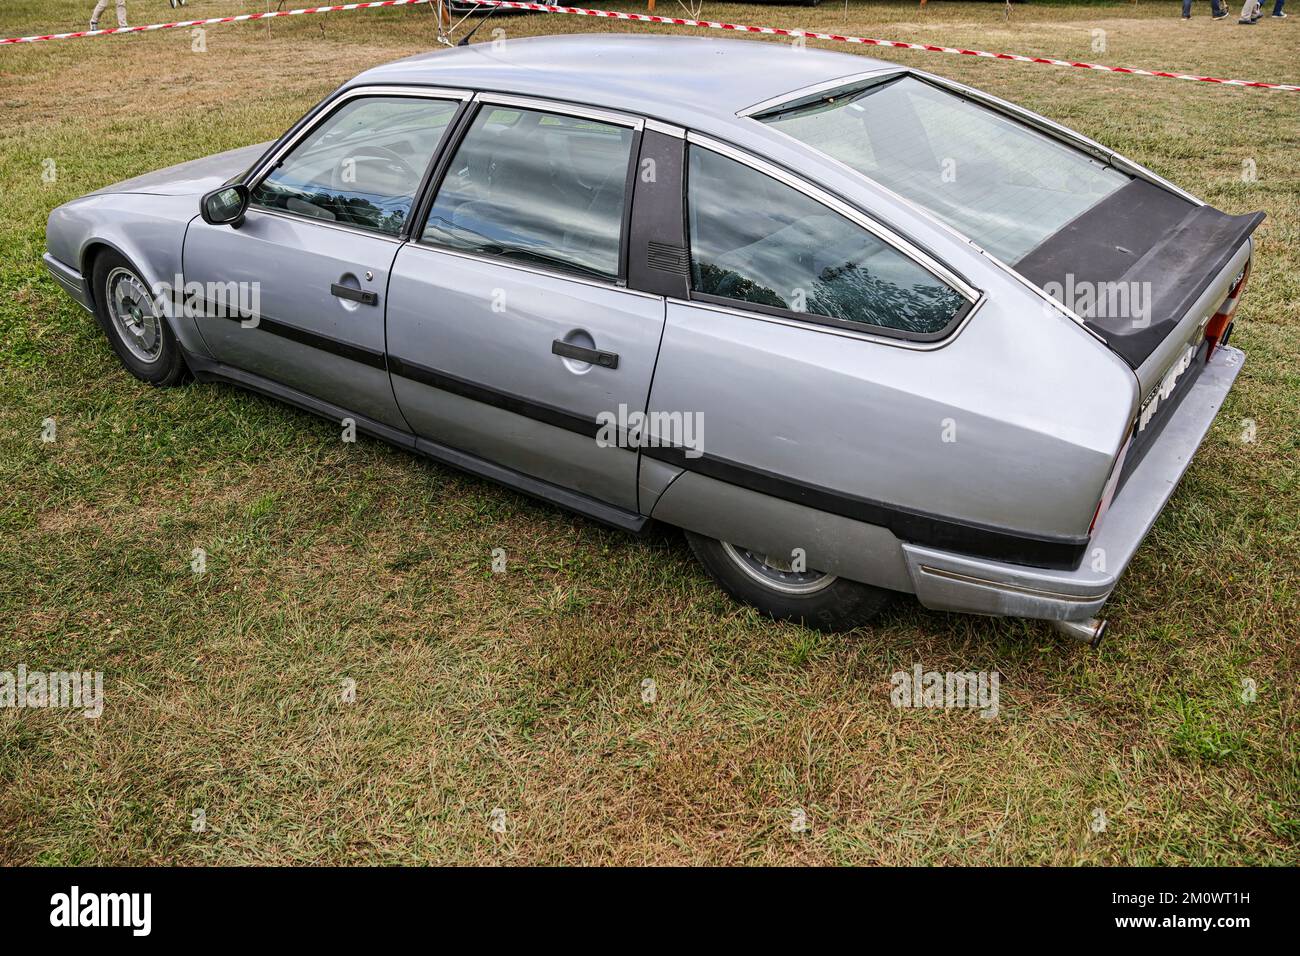 A high angle side view of a classic grey Citroen model CX Pallas in a field Stock Photo